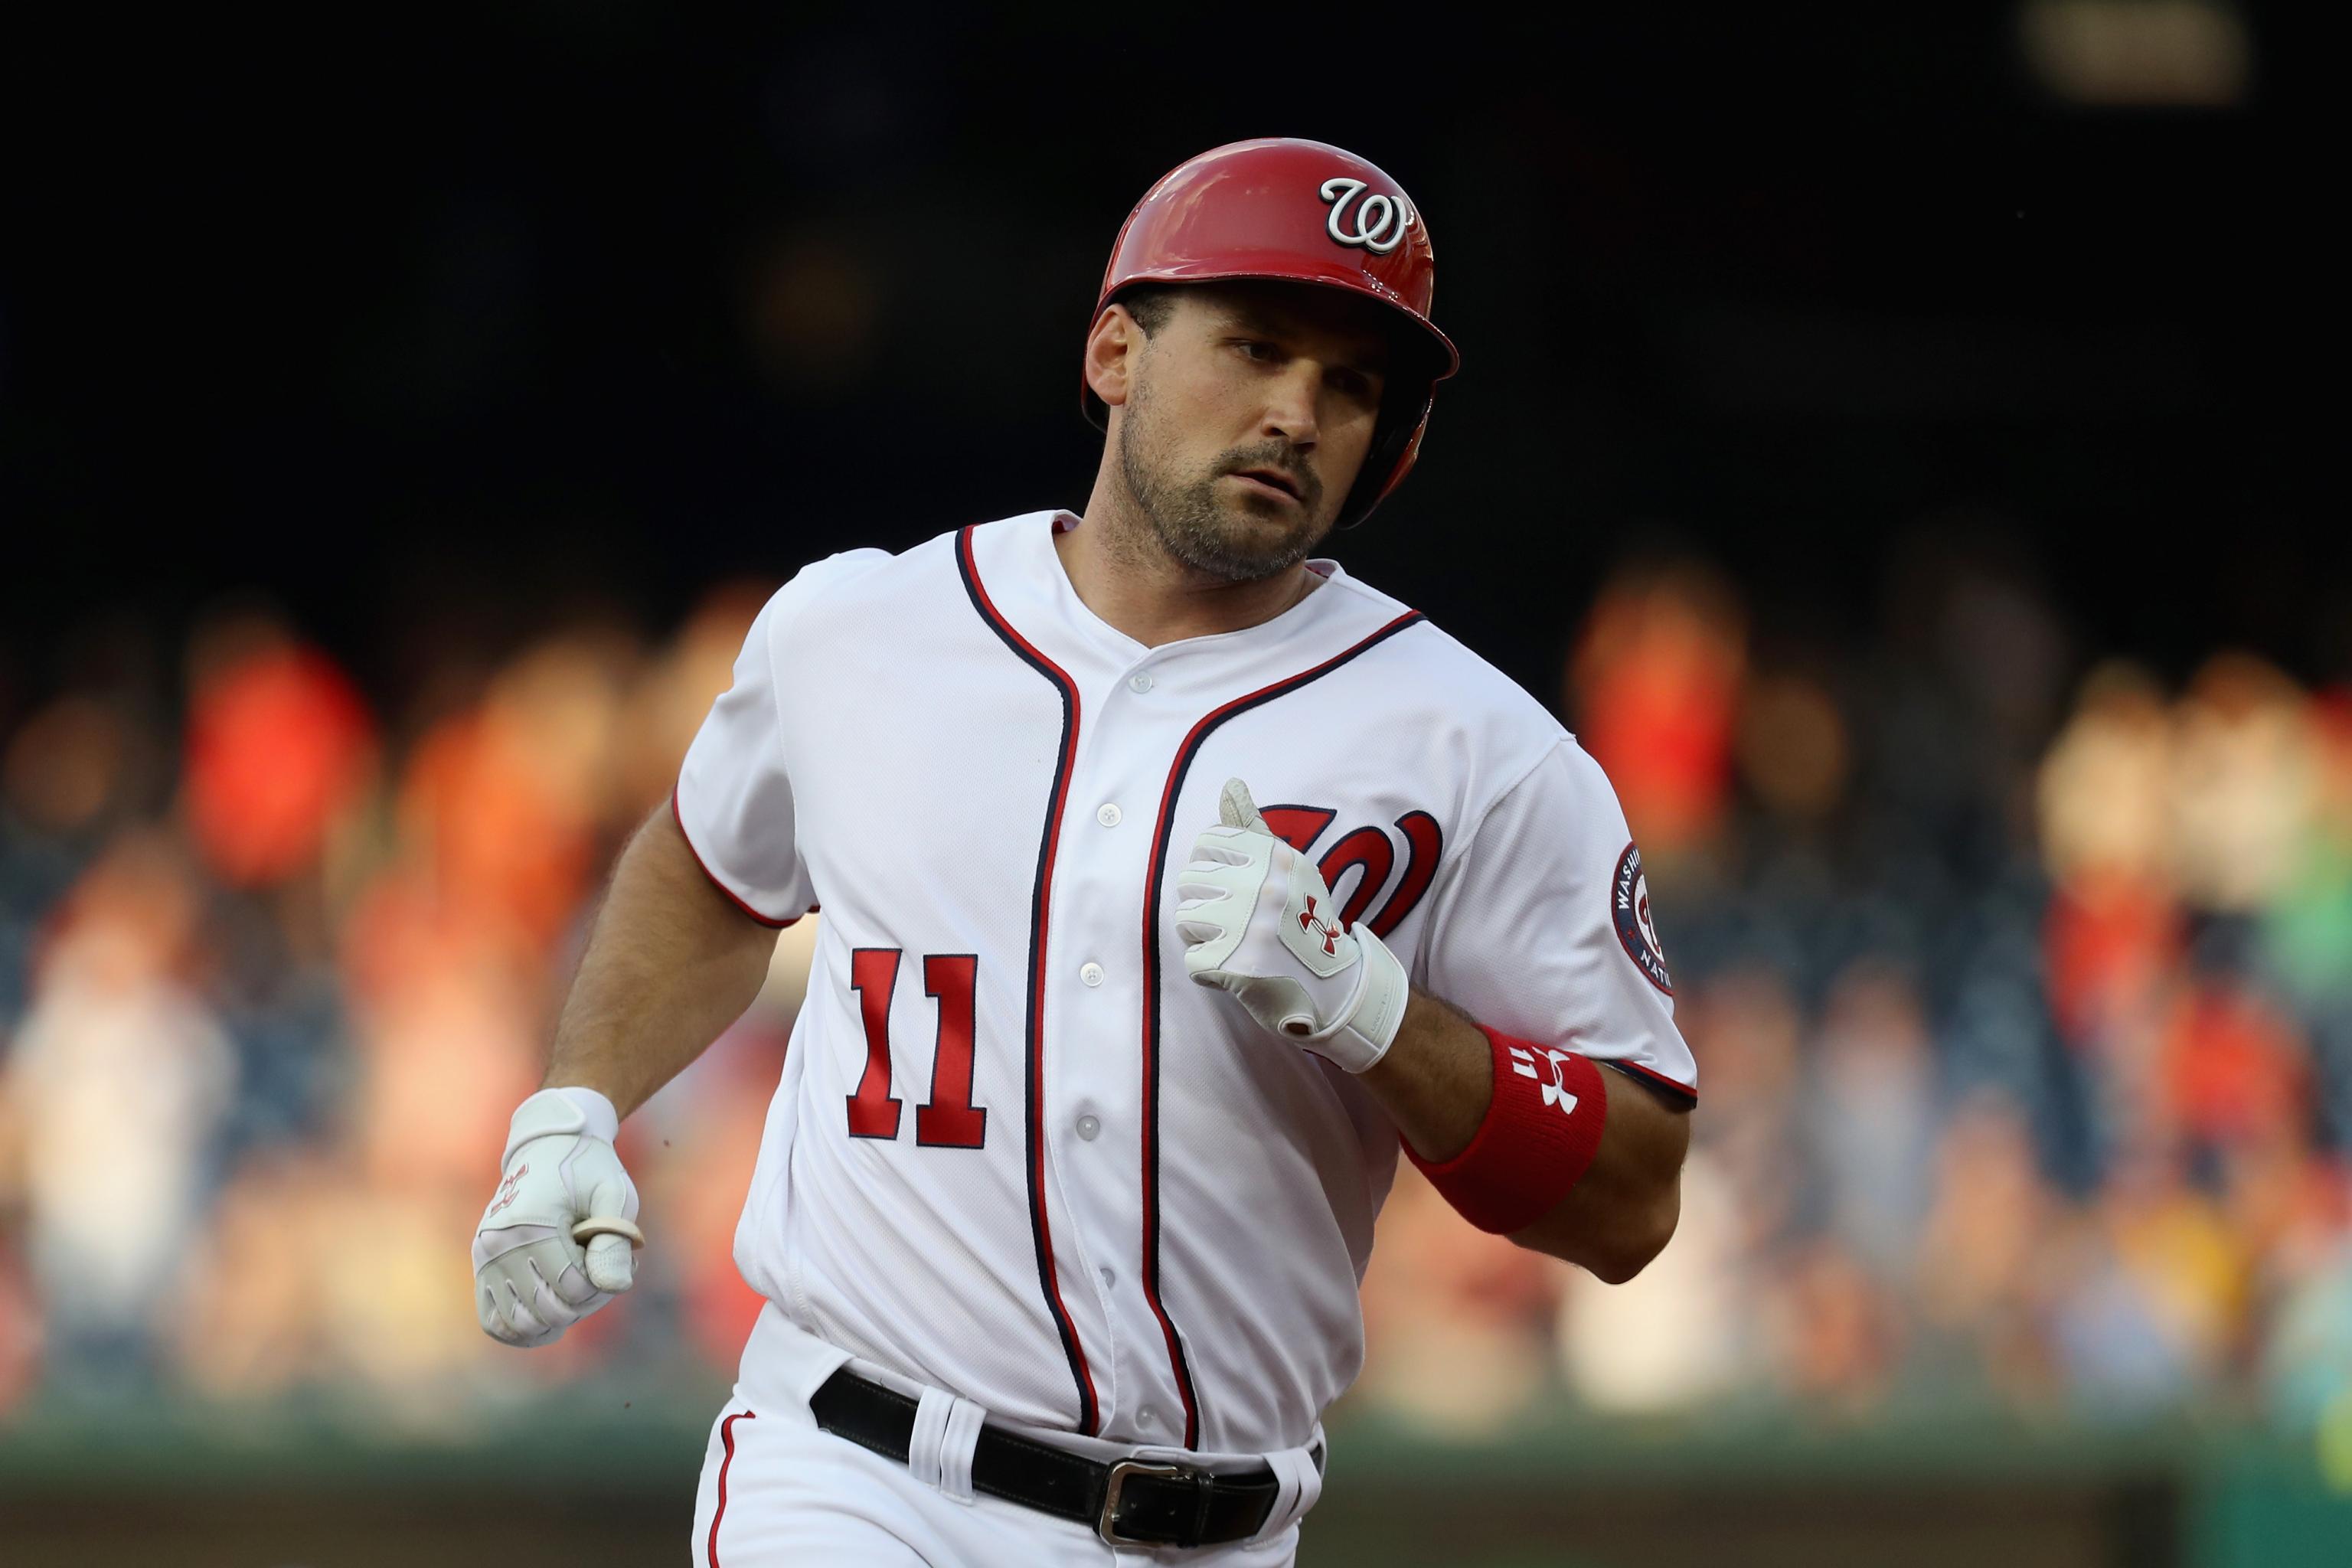 Ryan Zimmerman Expos Gear: Game-Used Jersey, Game-Used Pants, and  Team-Issued Batting Helmet